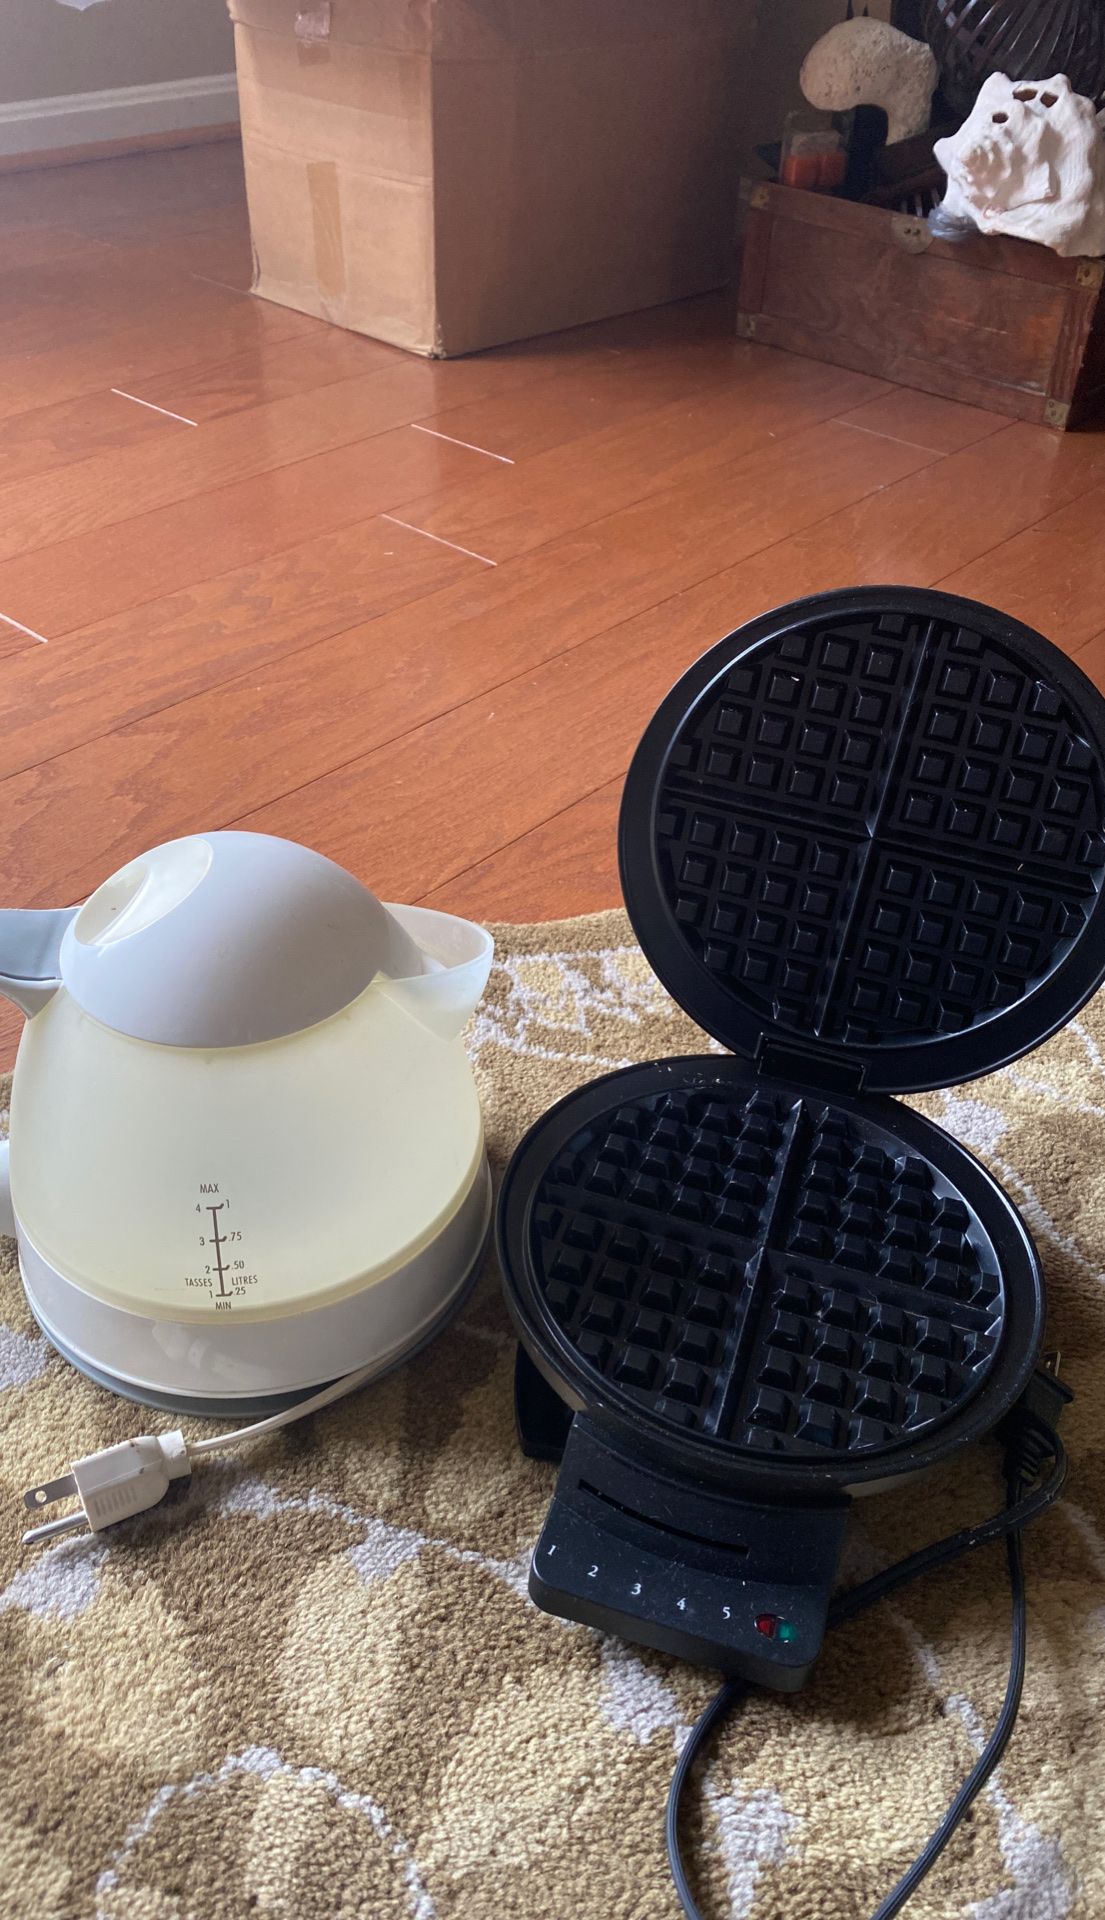 Electric kettle and waffle maker